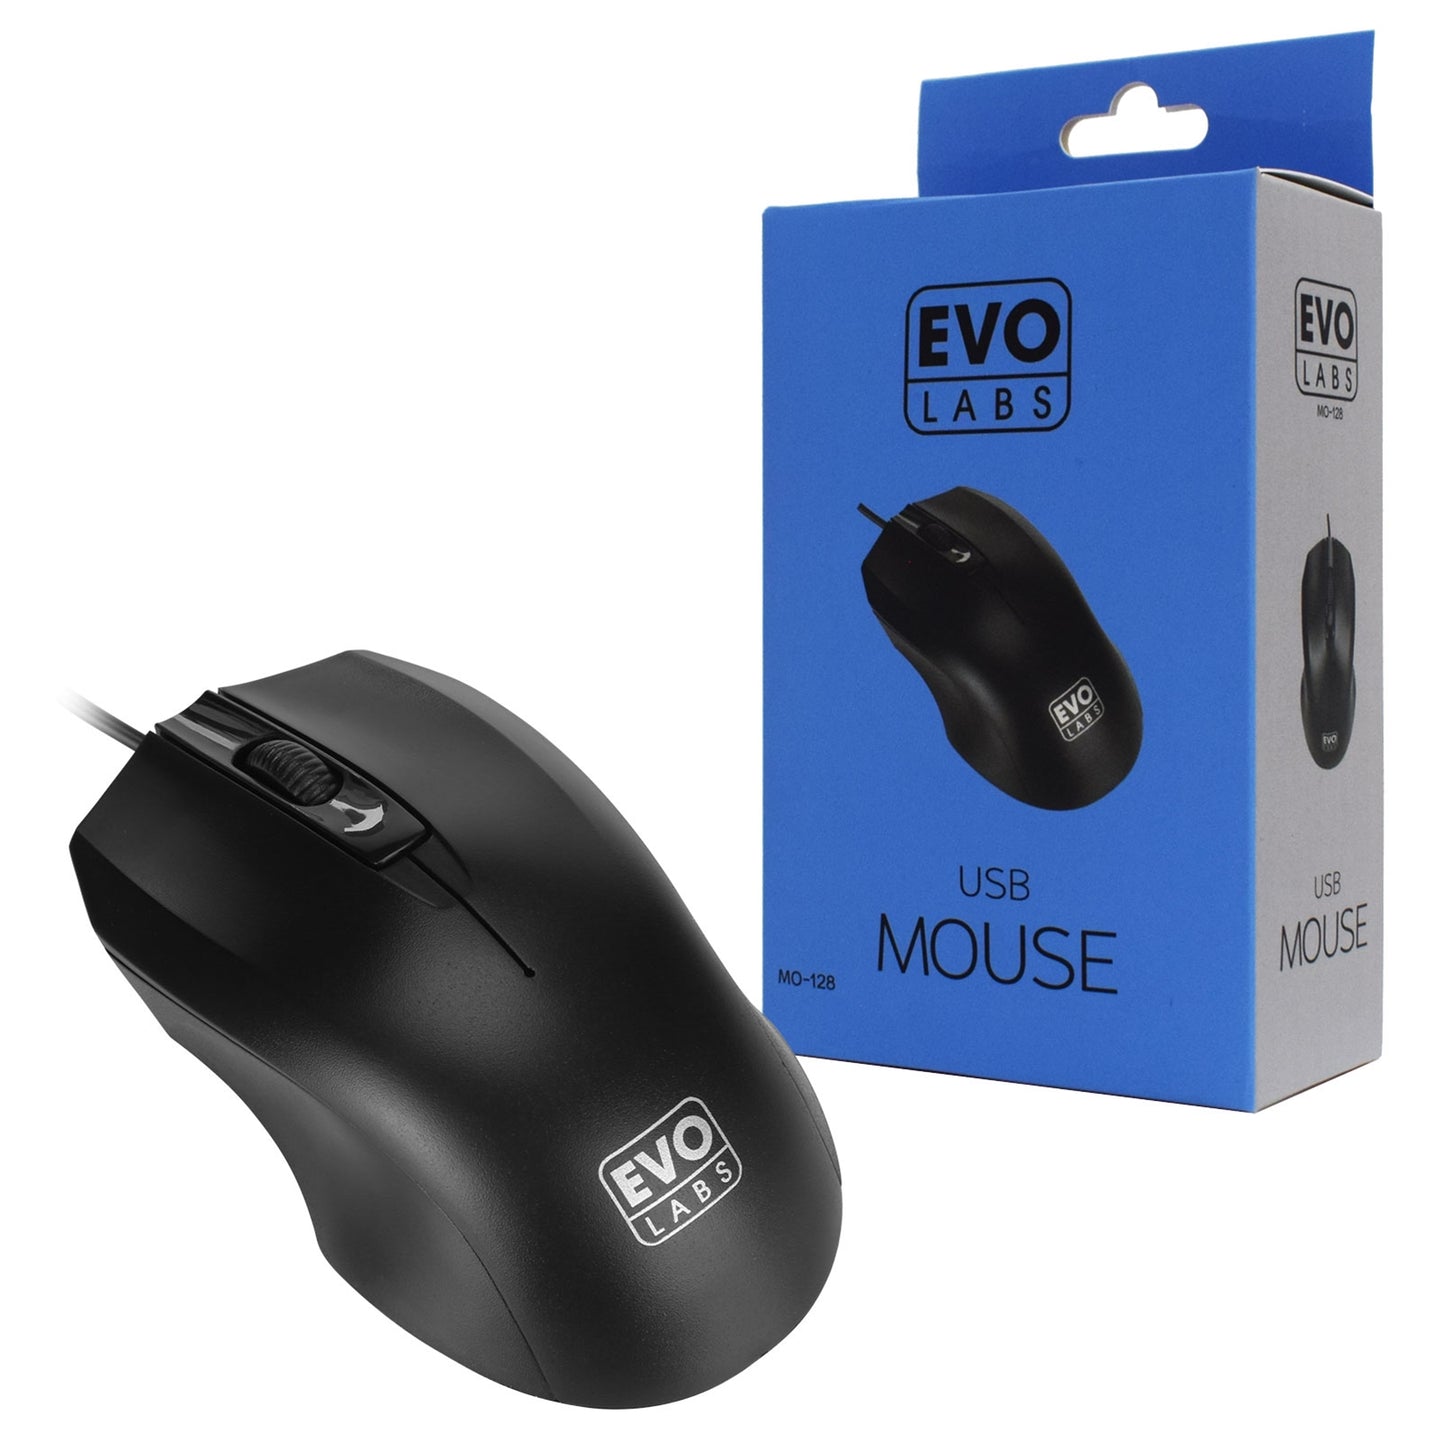 Evo Labs MO-128 Wired USB Plug and Play Mouse, 800 DPI Optical Tracking, 3 Button with Scroll Wheel,Ambidextrous Design, Matte Black